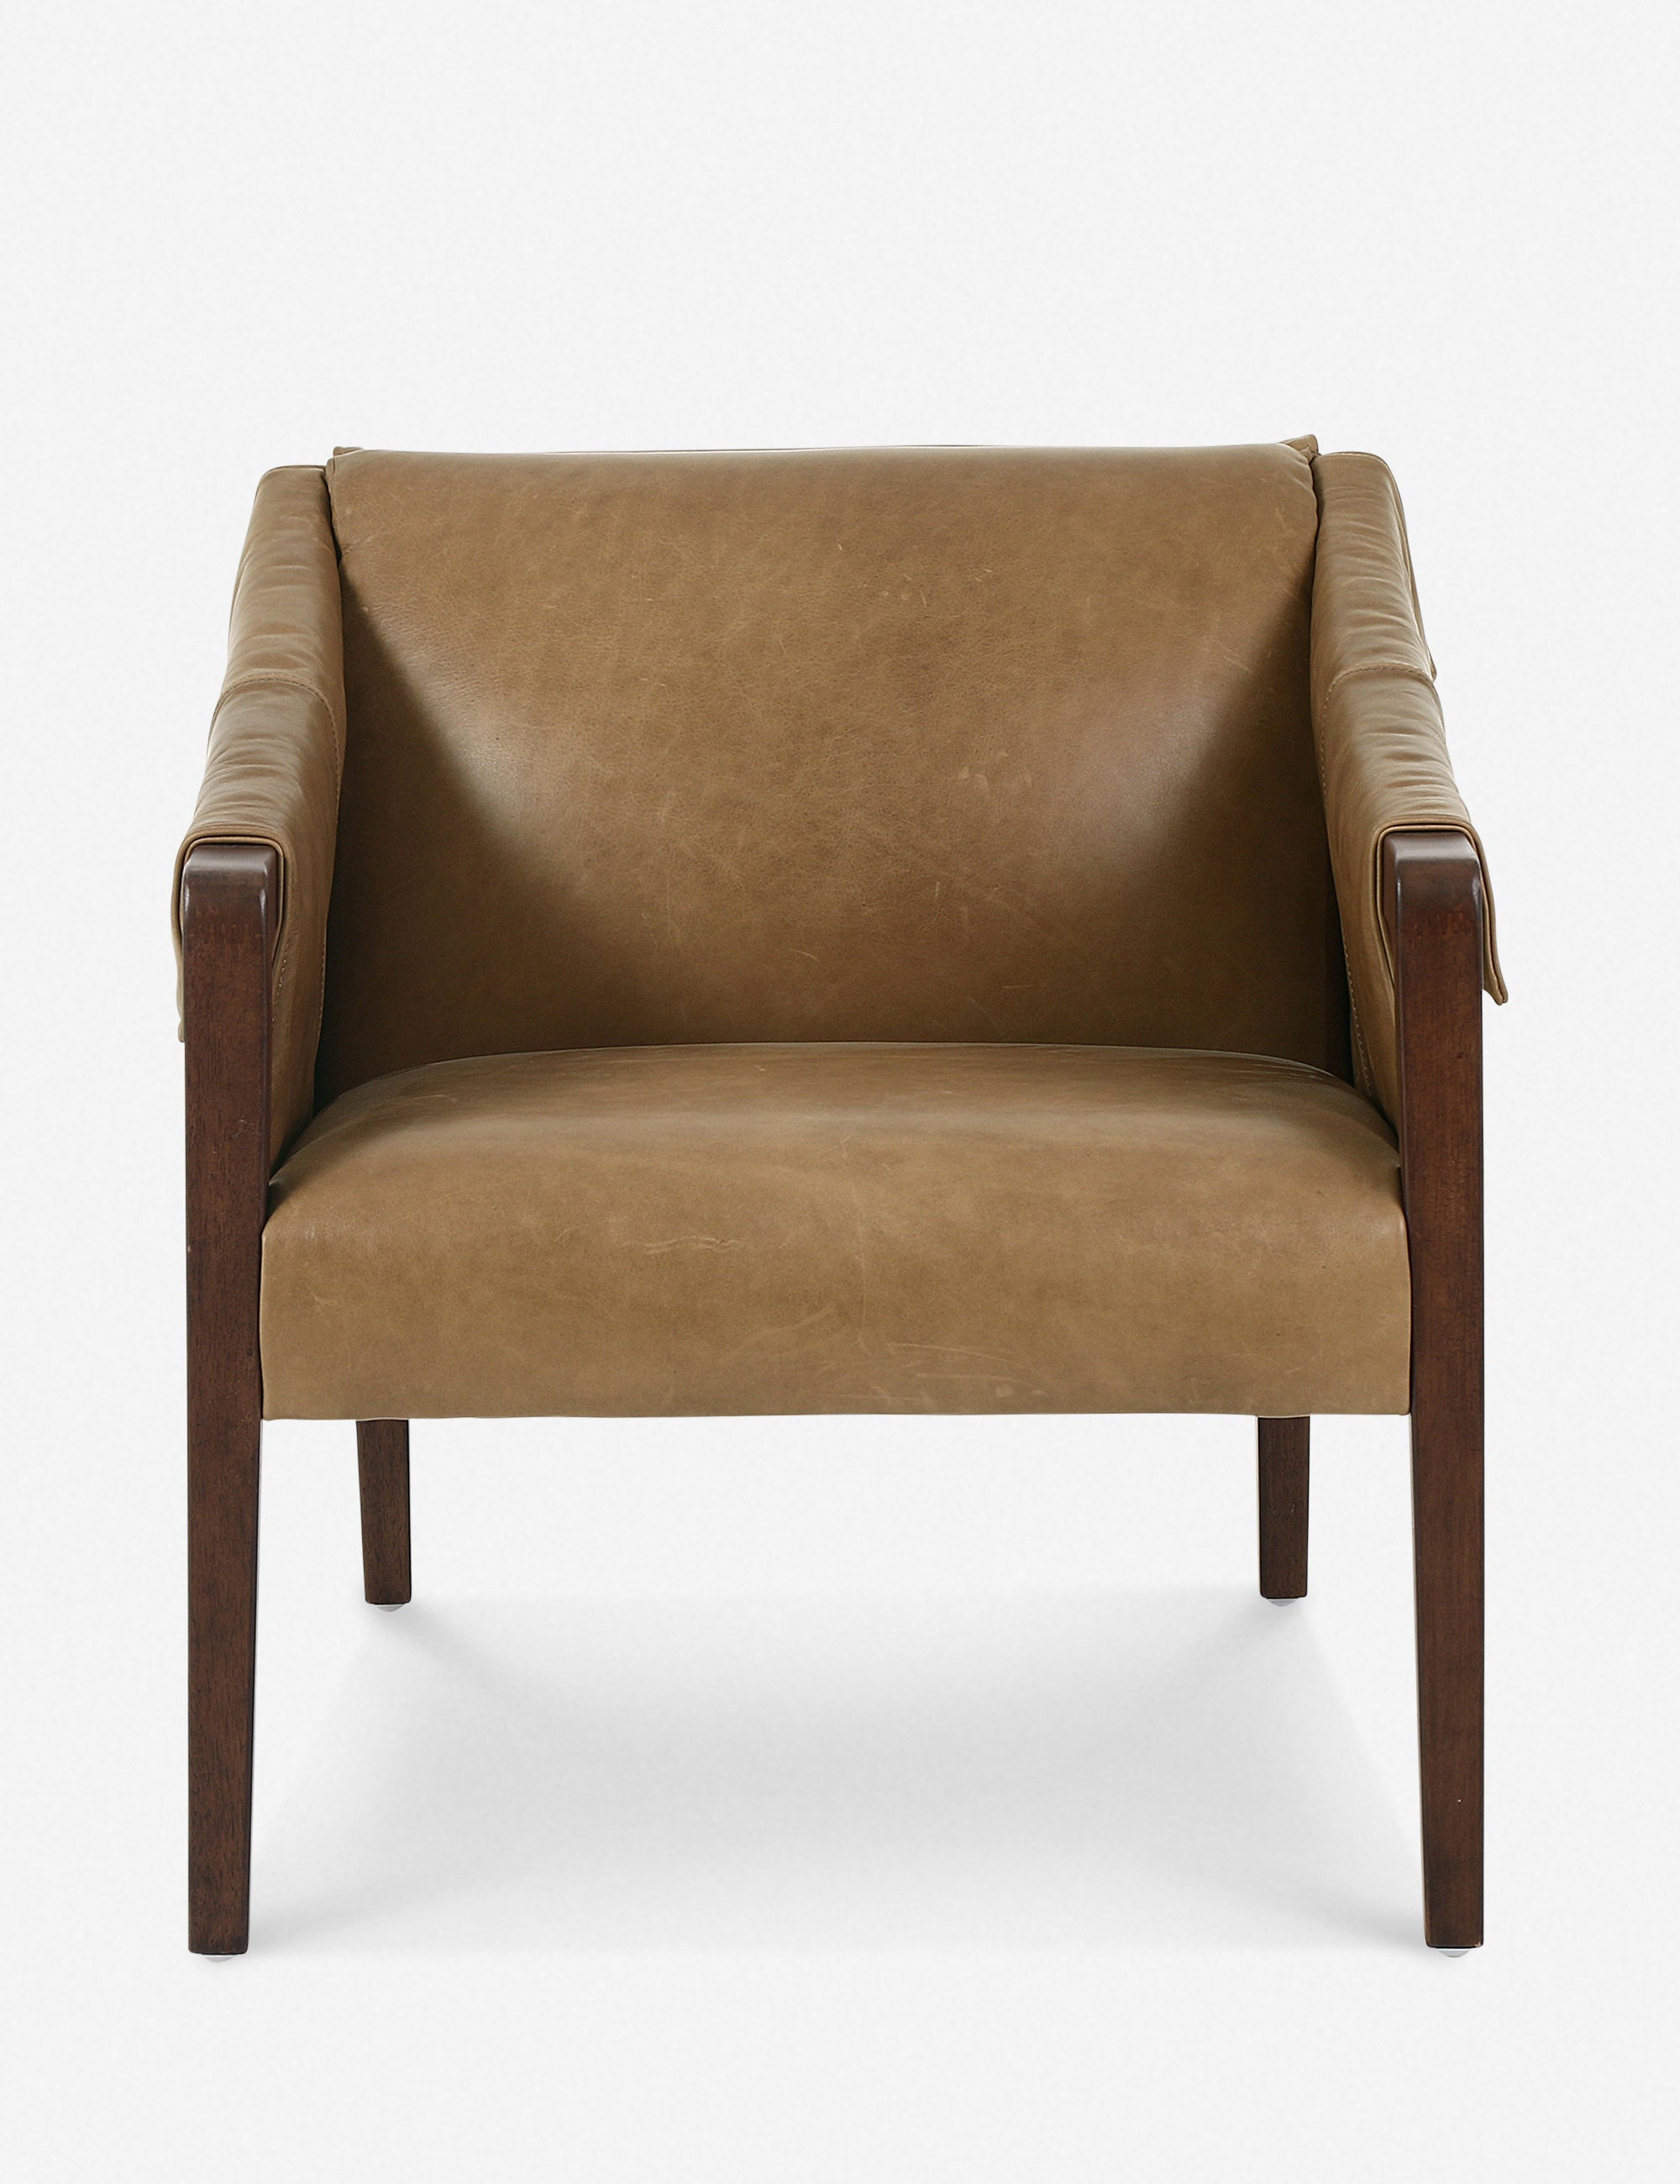 Whittier Accent Chair, Olive Leather